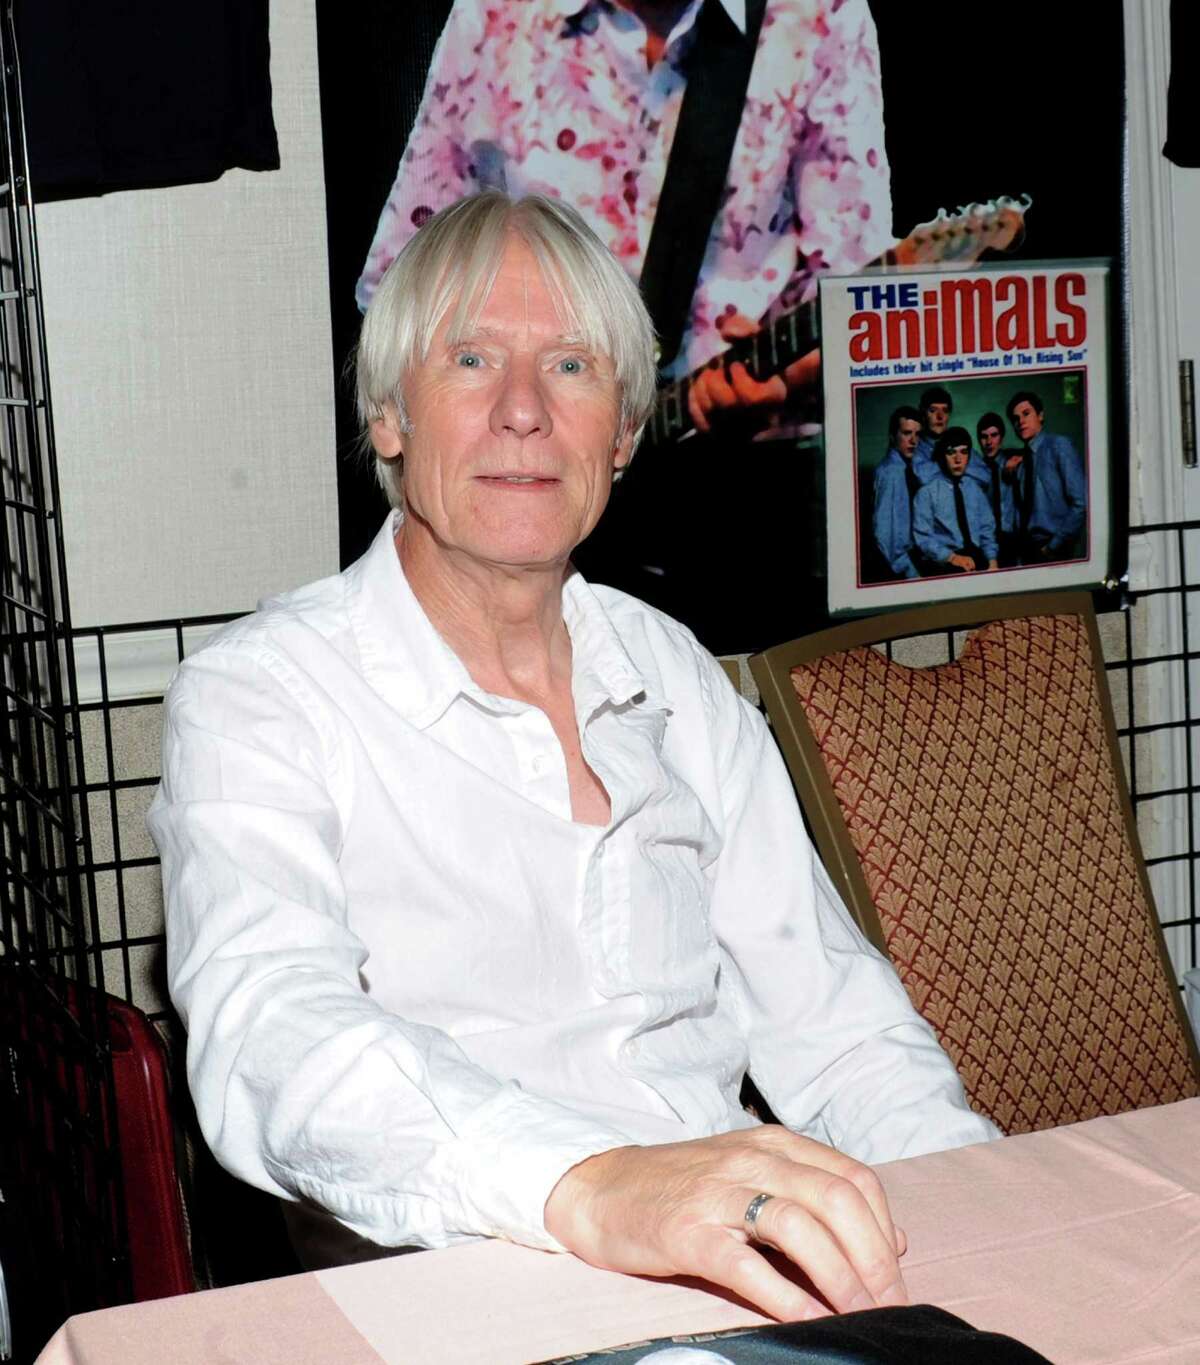 Hilton Valentine, of The Animals, attends the 2010 Rock Con: The National Rock & Roll Fan Fest at the Sheraton Meadowlands Hotel & Conference Center in East Rutherford, N.J. Valentine will be in Danbury on Saturday, Aug. 15, for the "Fab 4 Festival."